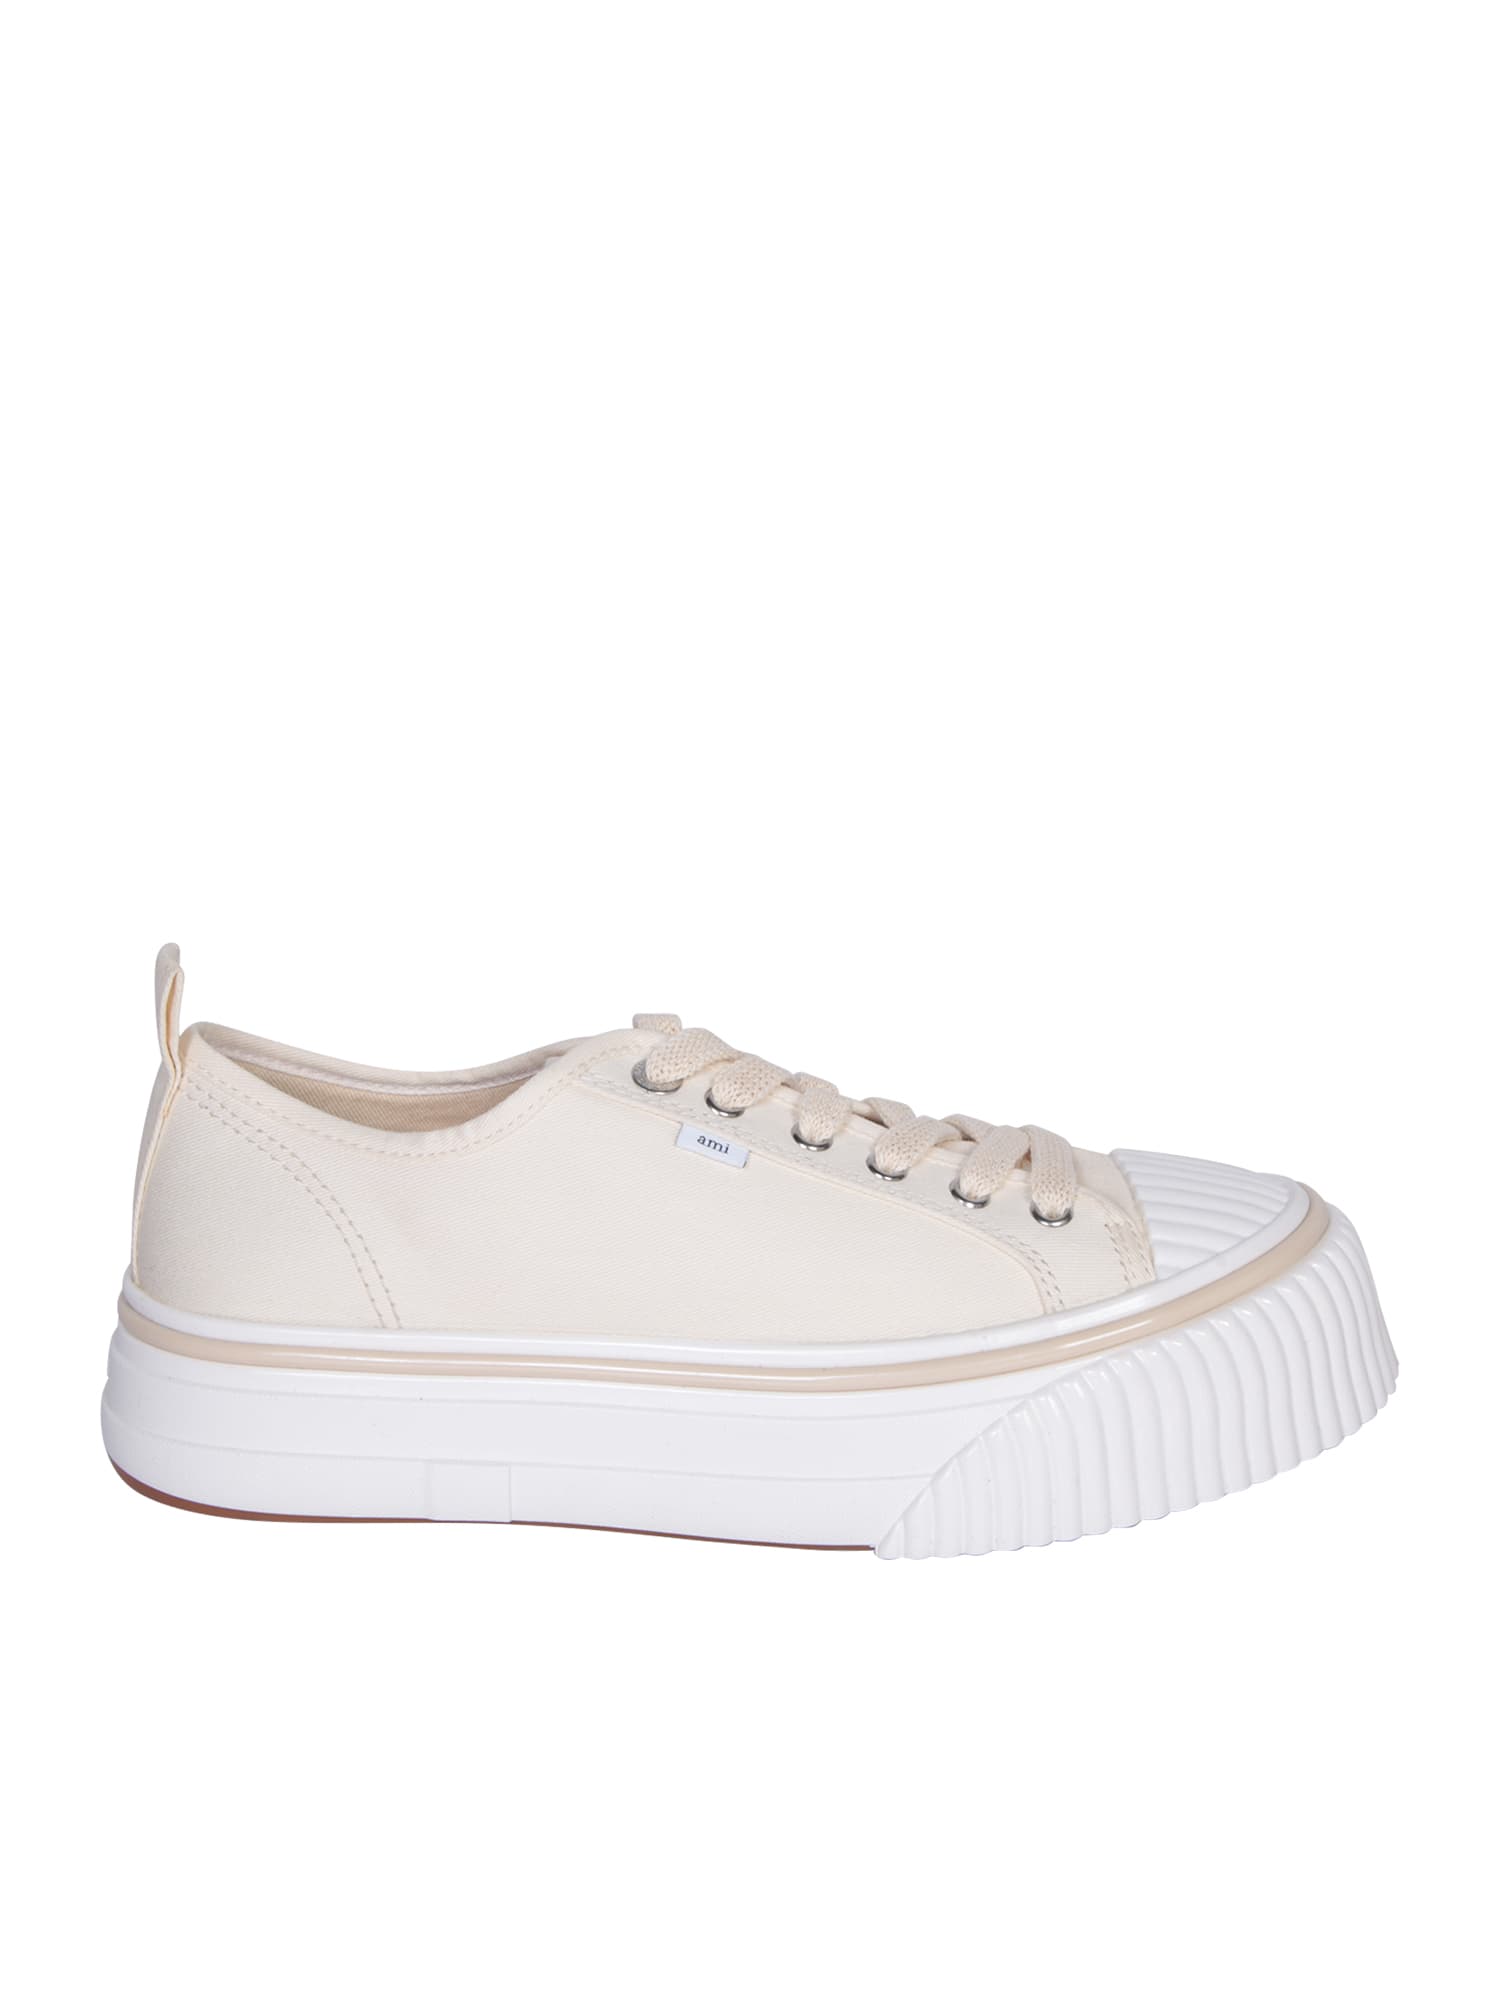 1980 Low Top Sneakers White